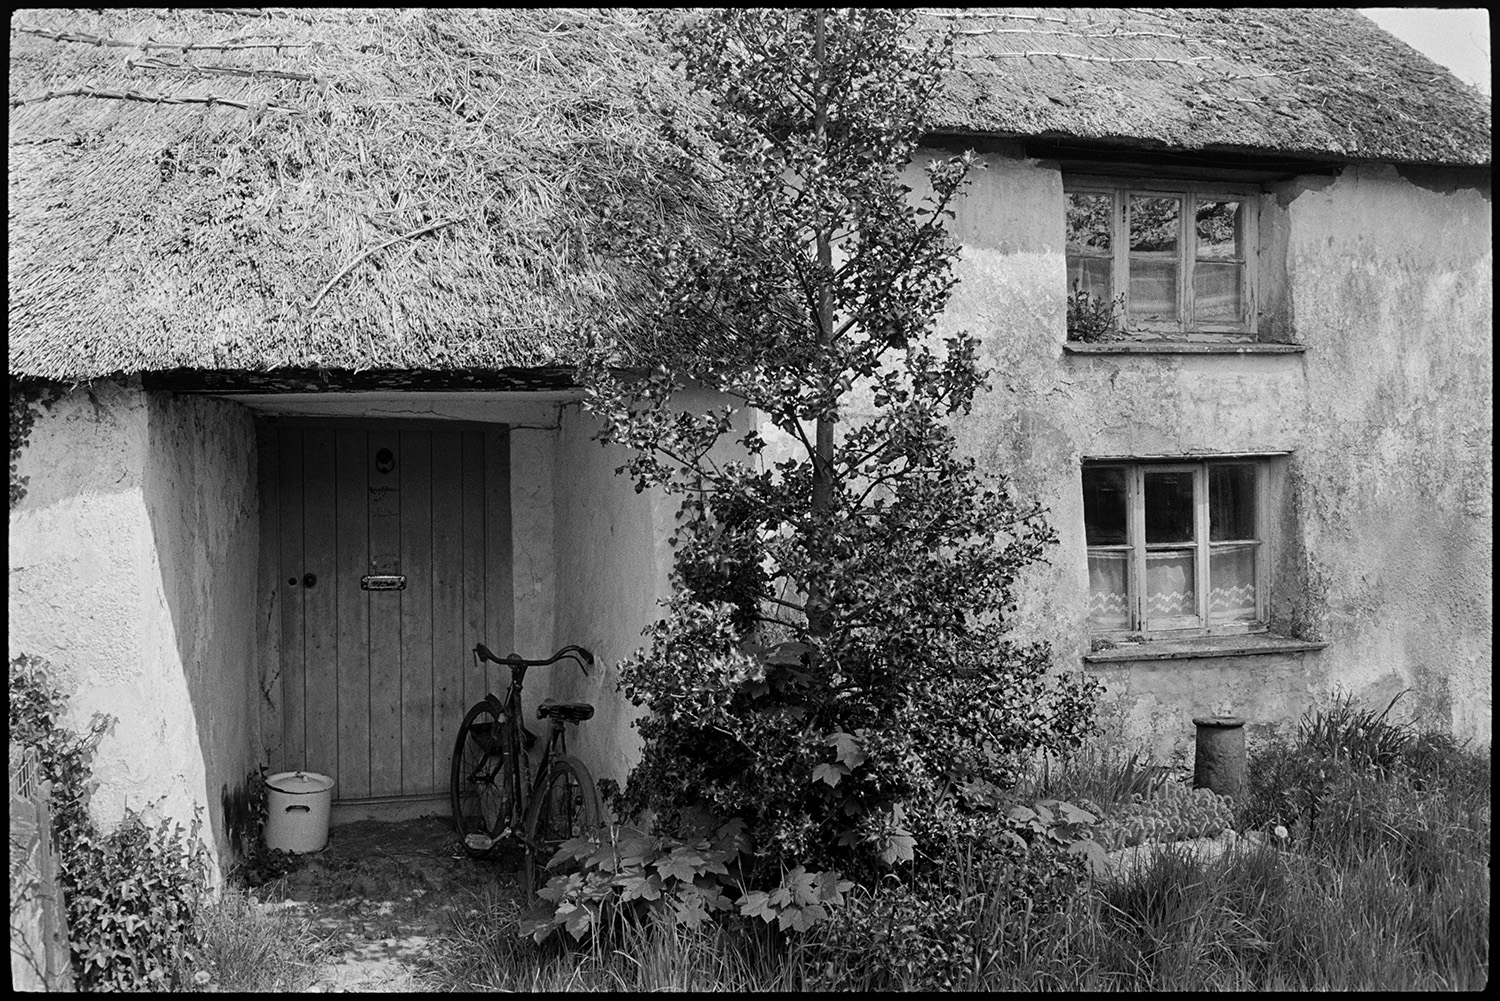 Street scenes, house with porch, thatched farmhouse and door, people chatting, church tower. 
[A bicycle parked in the porch outside the front door to a thatched farmhouse in Northlew.]